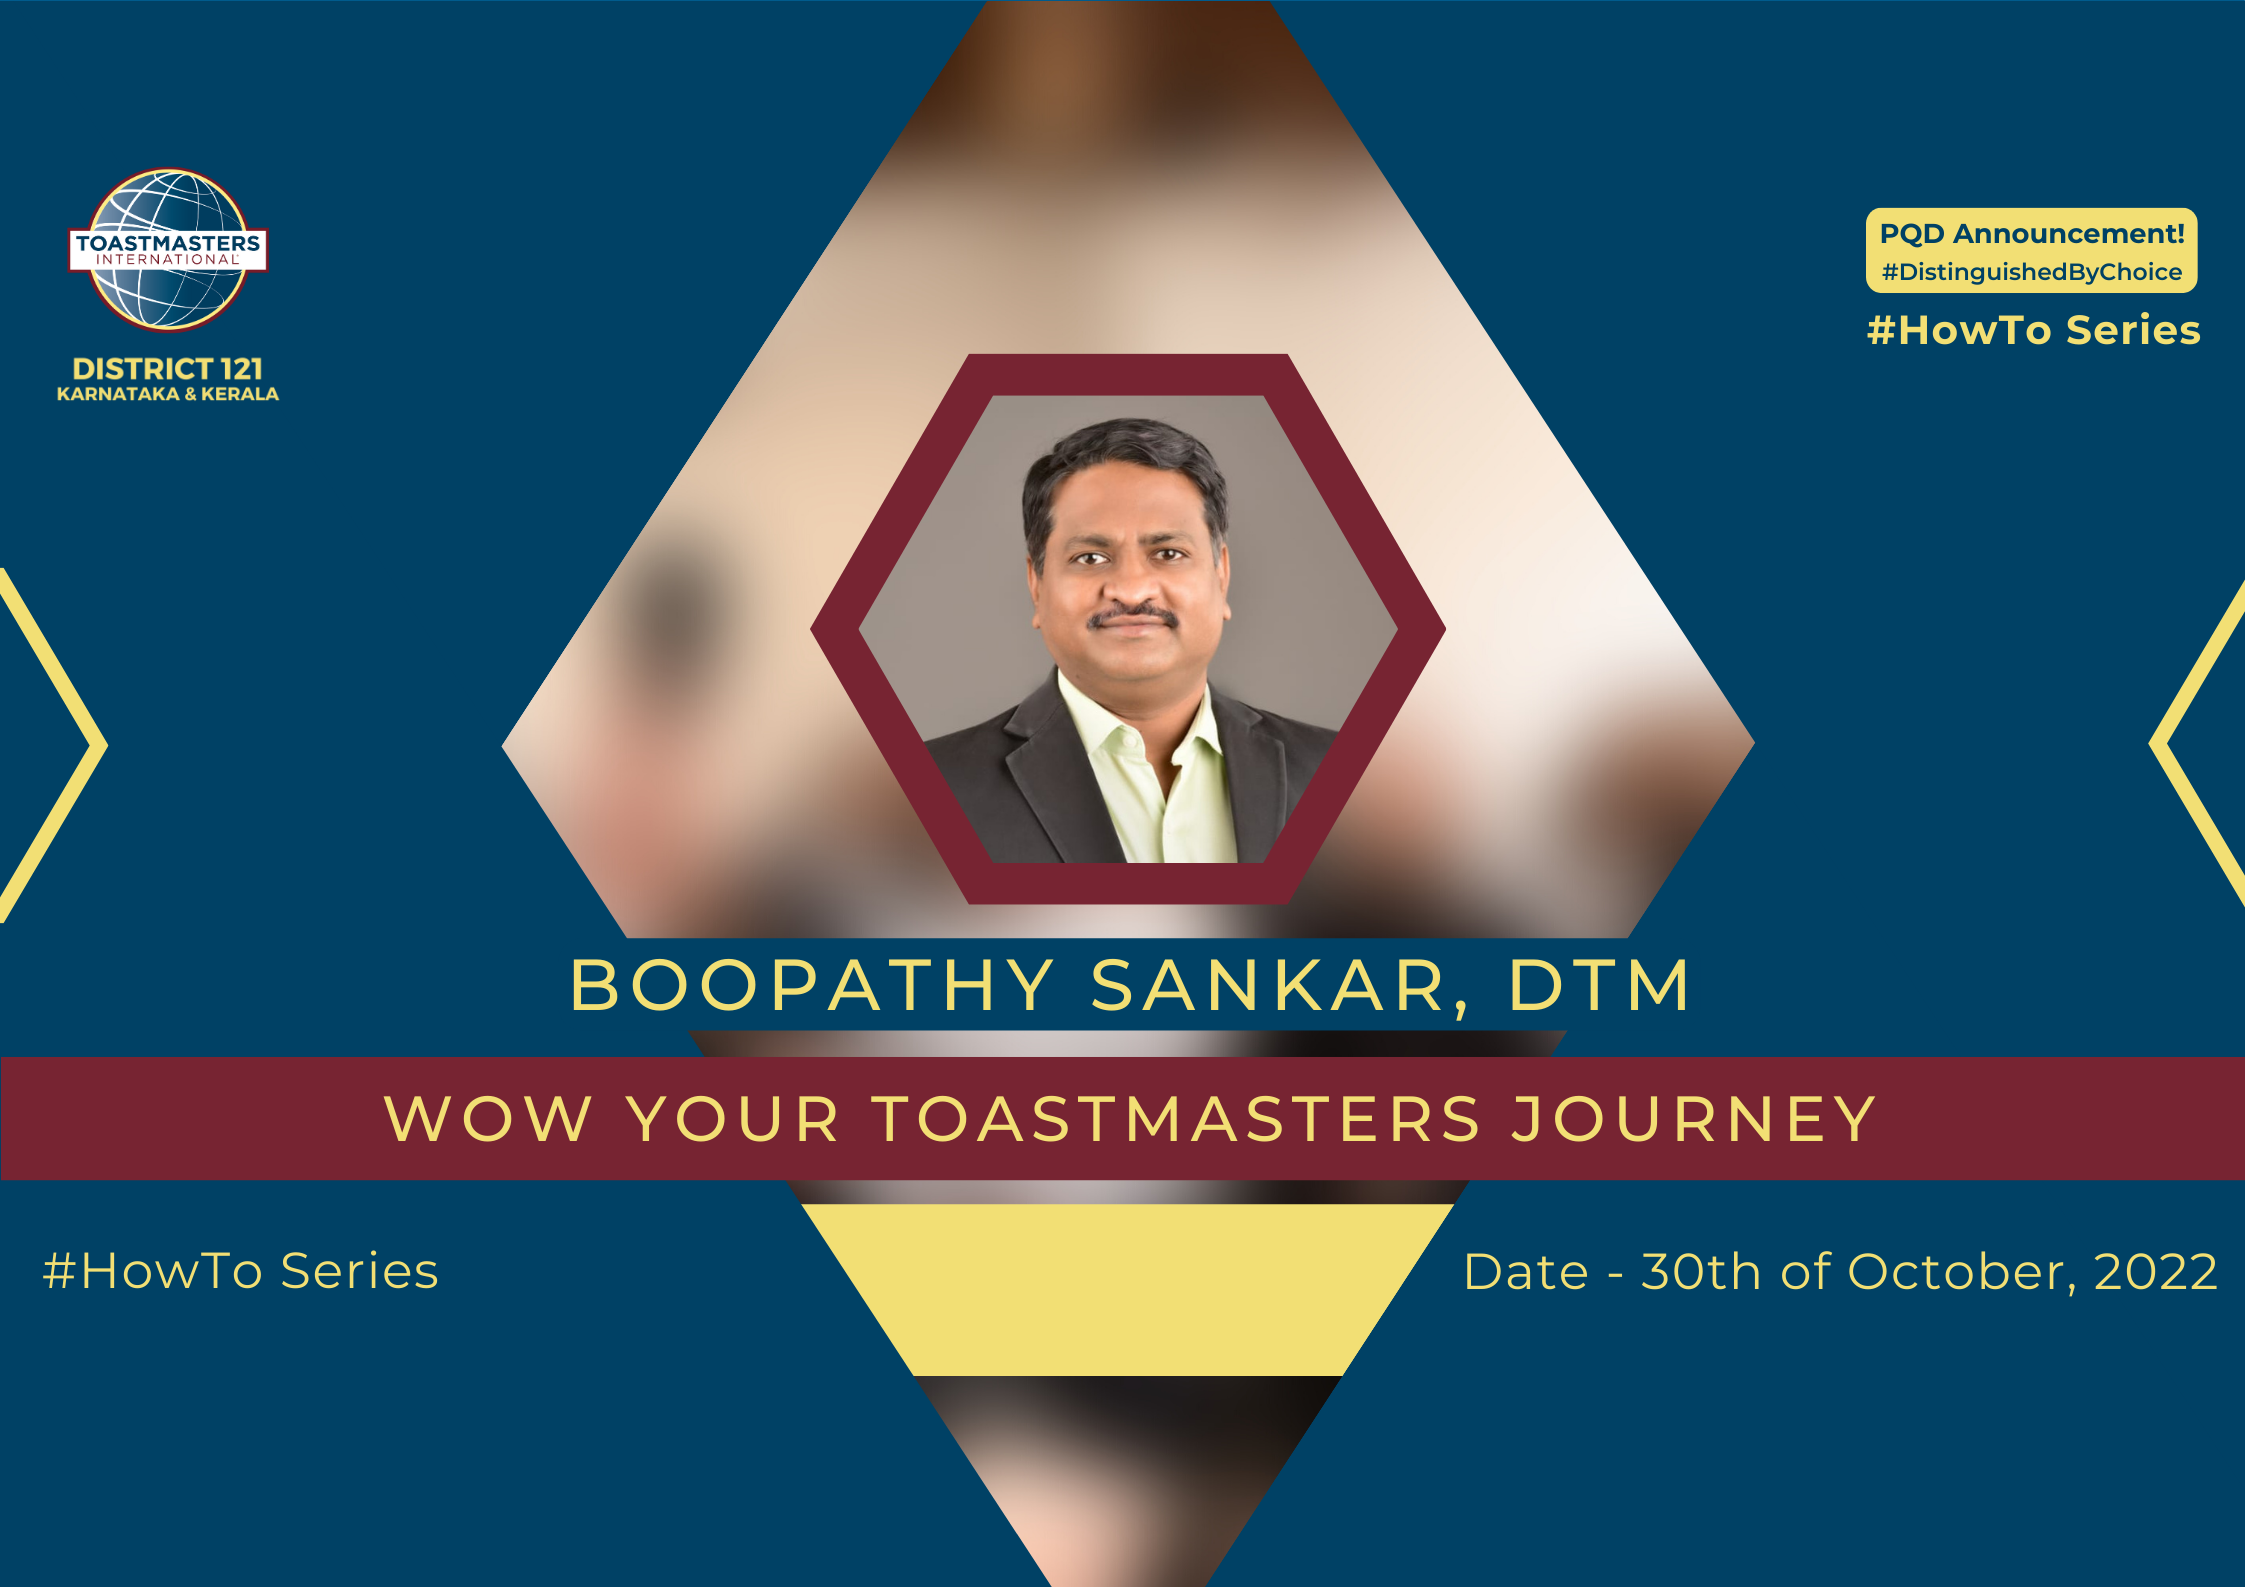 Wow your Toastmasters journey